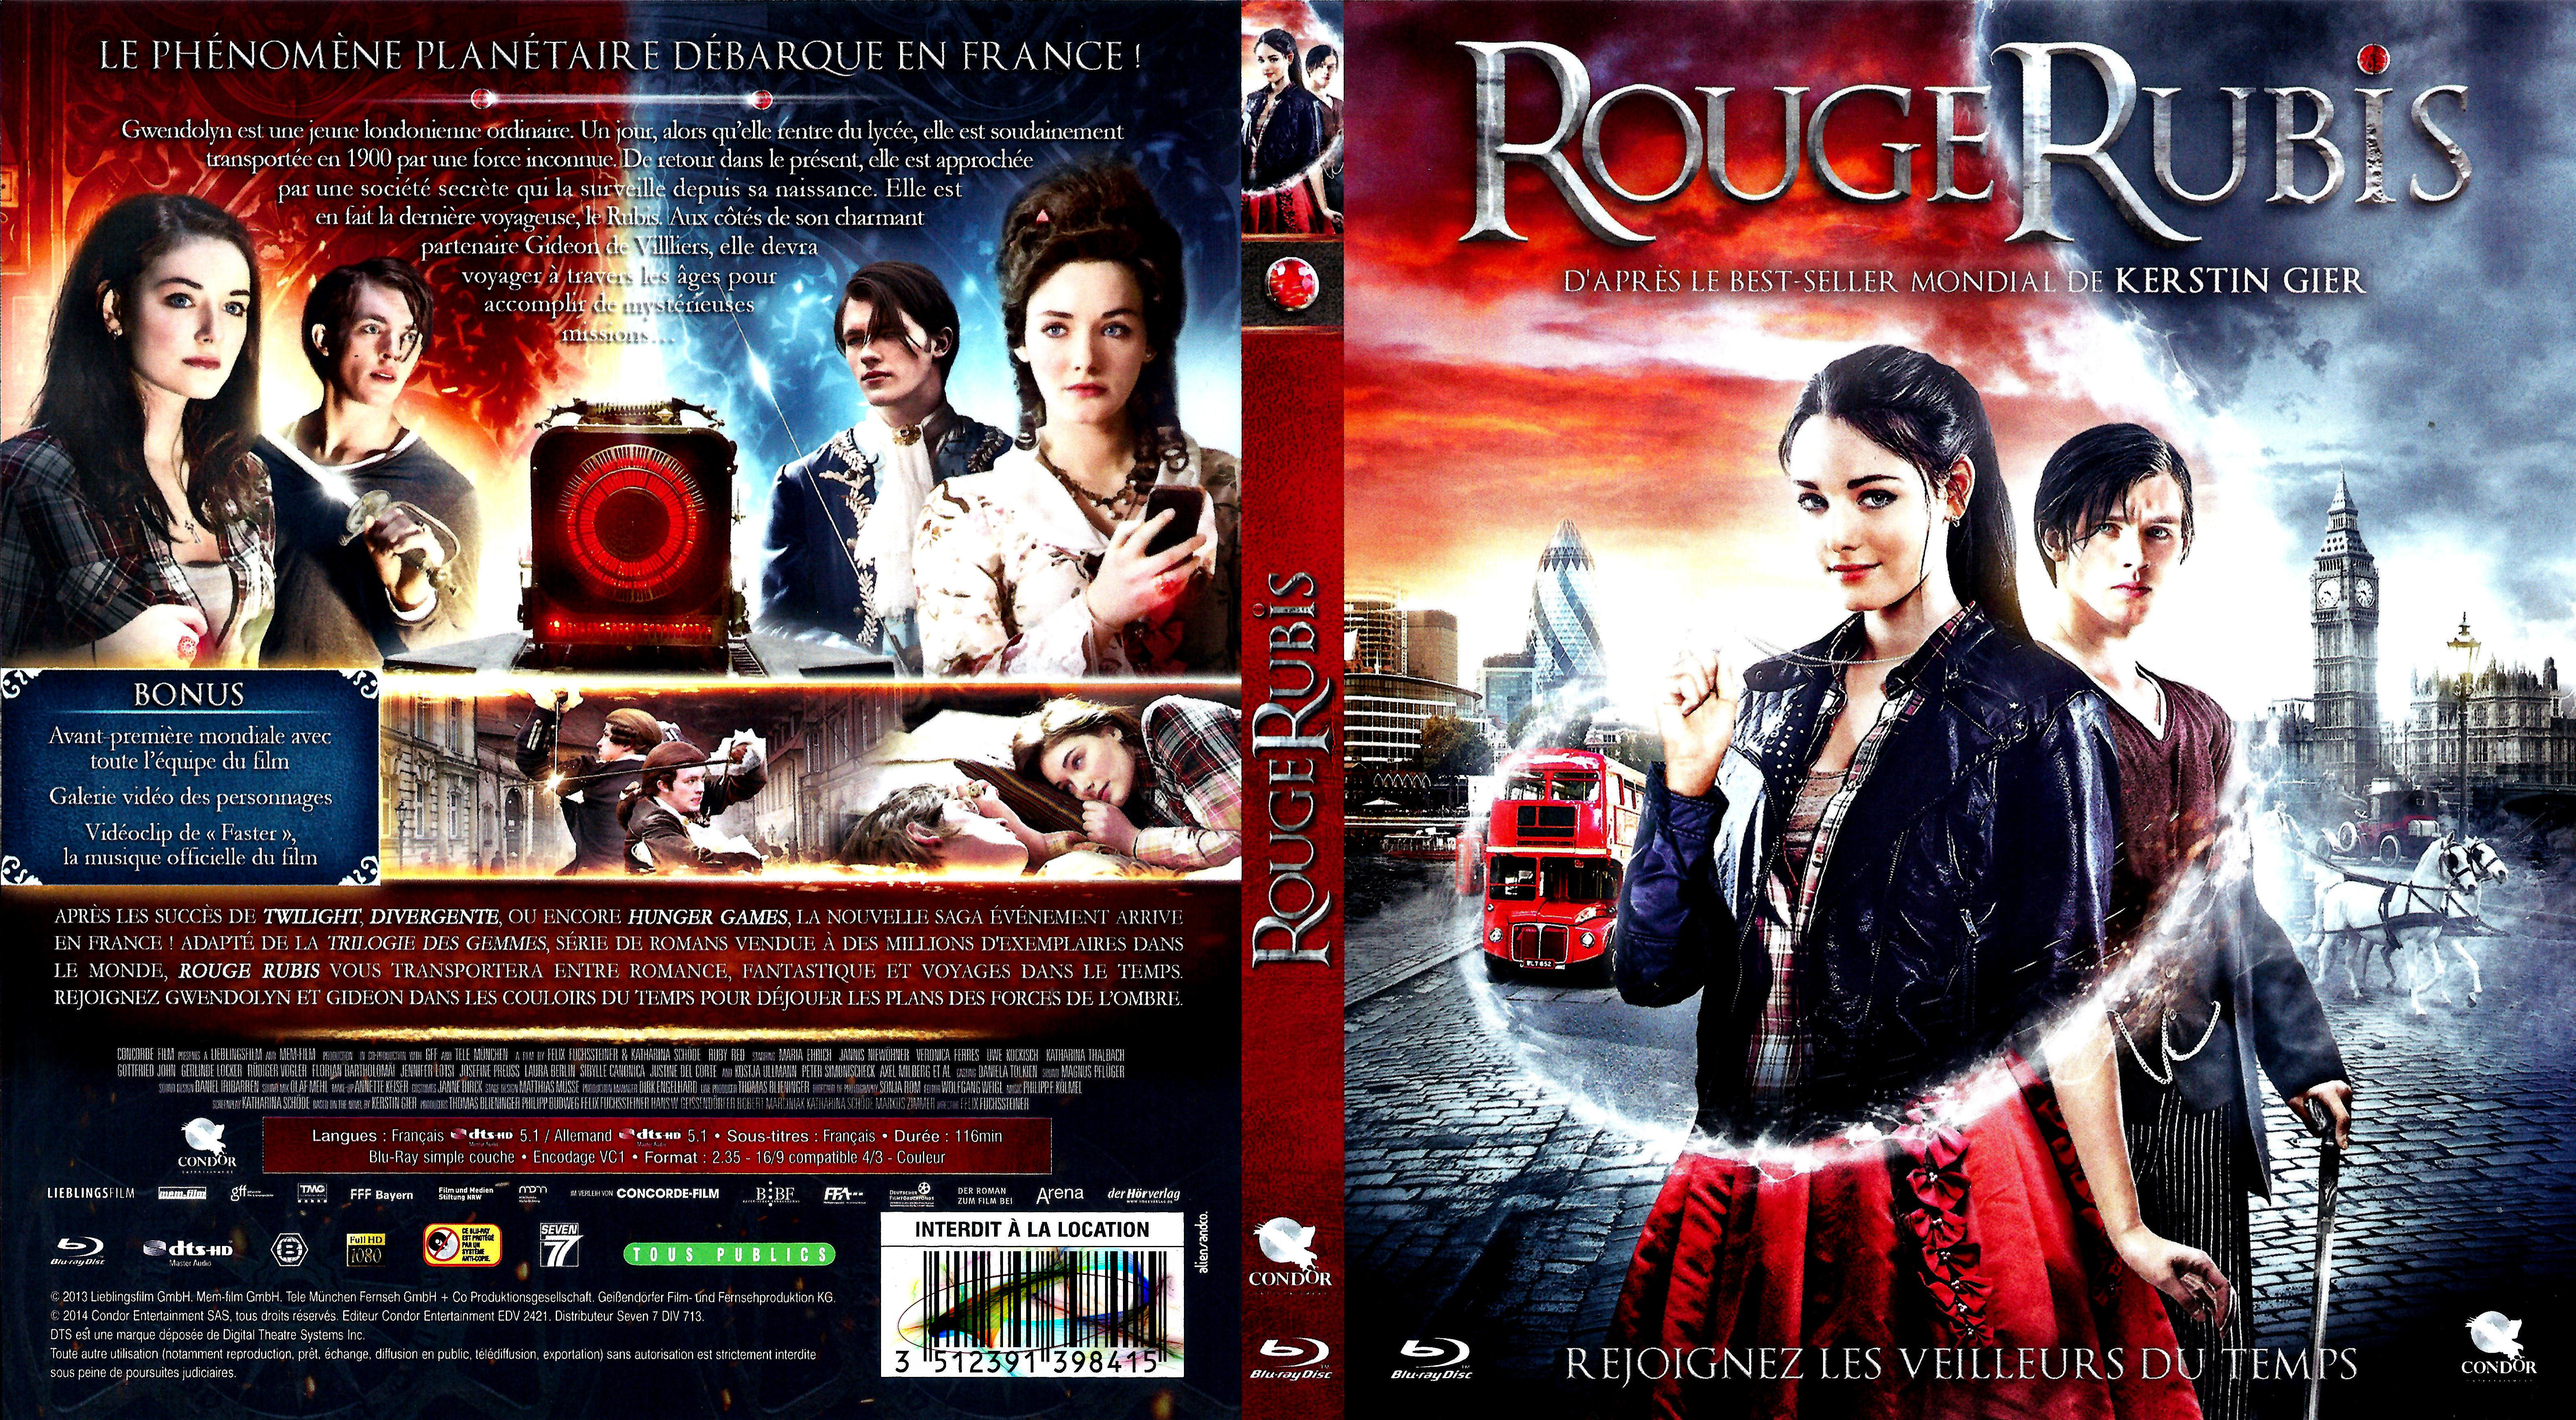 Jaquette DVD Rouge rubis (BLU-RAY)